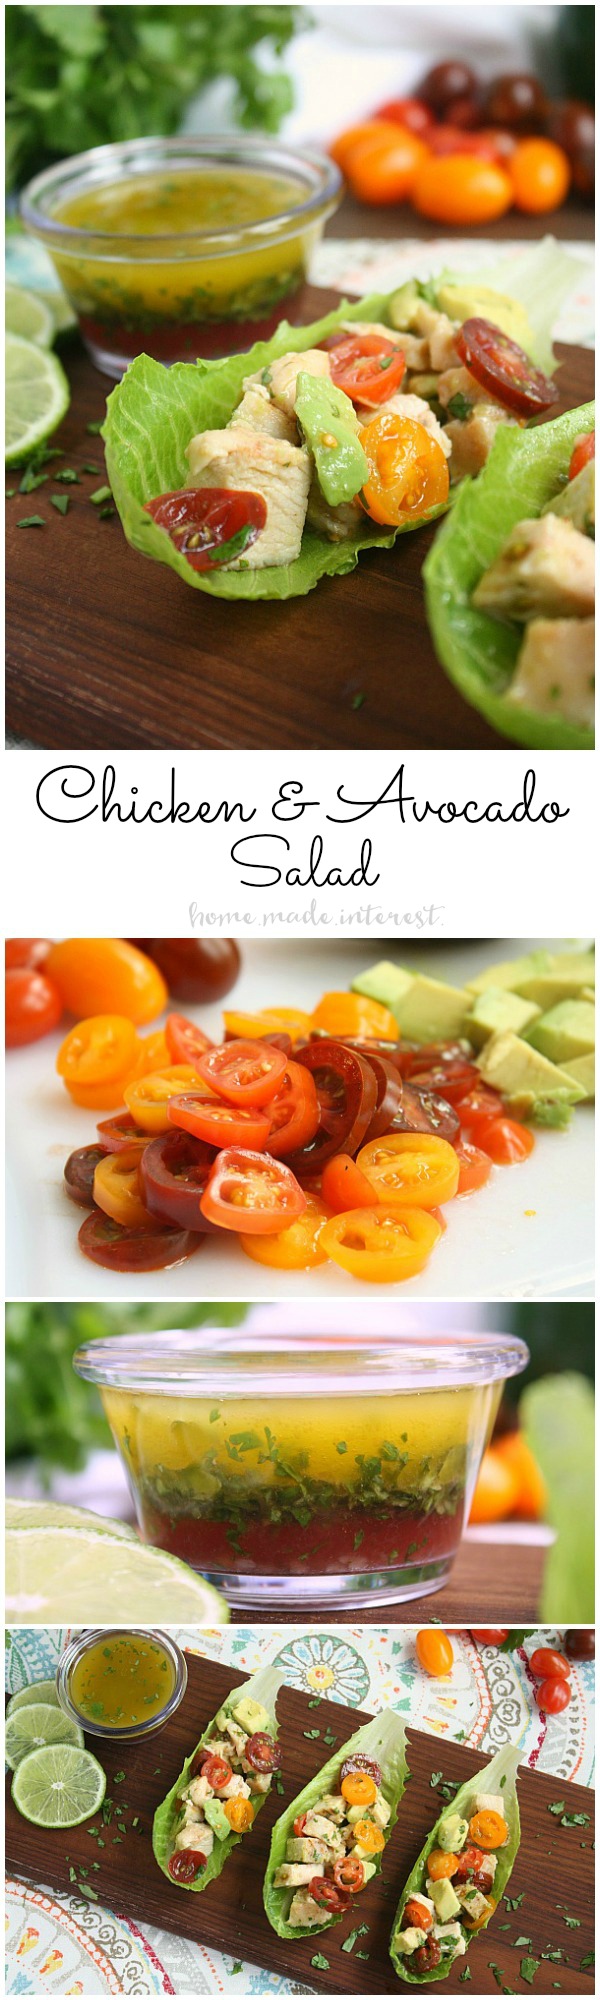 If you want a light, low carb lunch option this chicken and avocado salad is one of my favorites. Grilled, or baked chicken, fresh avocado and tomatoes, and a light lime cilantro vinaigrette, in a simple lettuce wrap makes the perfect lunch. 